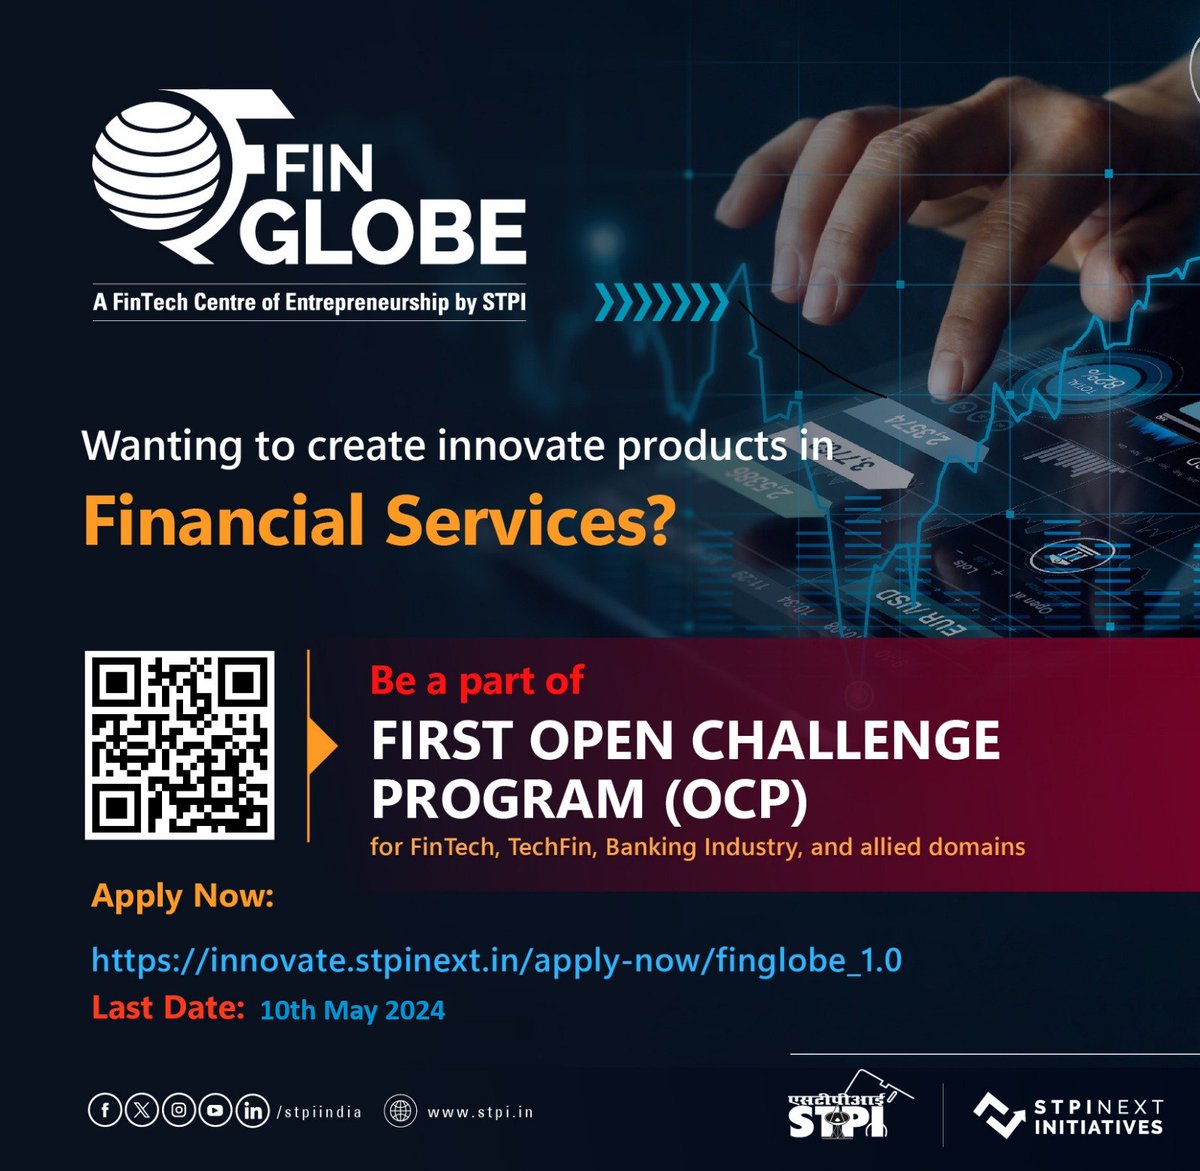 Only 1 day left!⏳ 

Send your application for the First Open Challenge Program of FinGlobe CoE before 10 May 2024.

Apply Now: innovate.stpinext.in/about-us/fingl…

Discover more: finglobe.stpi.in

#STPIINDIA #StartupIndia @arvindtw